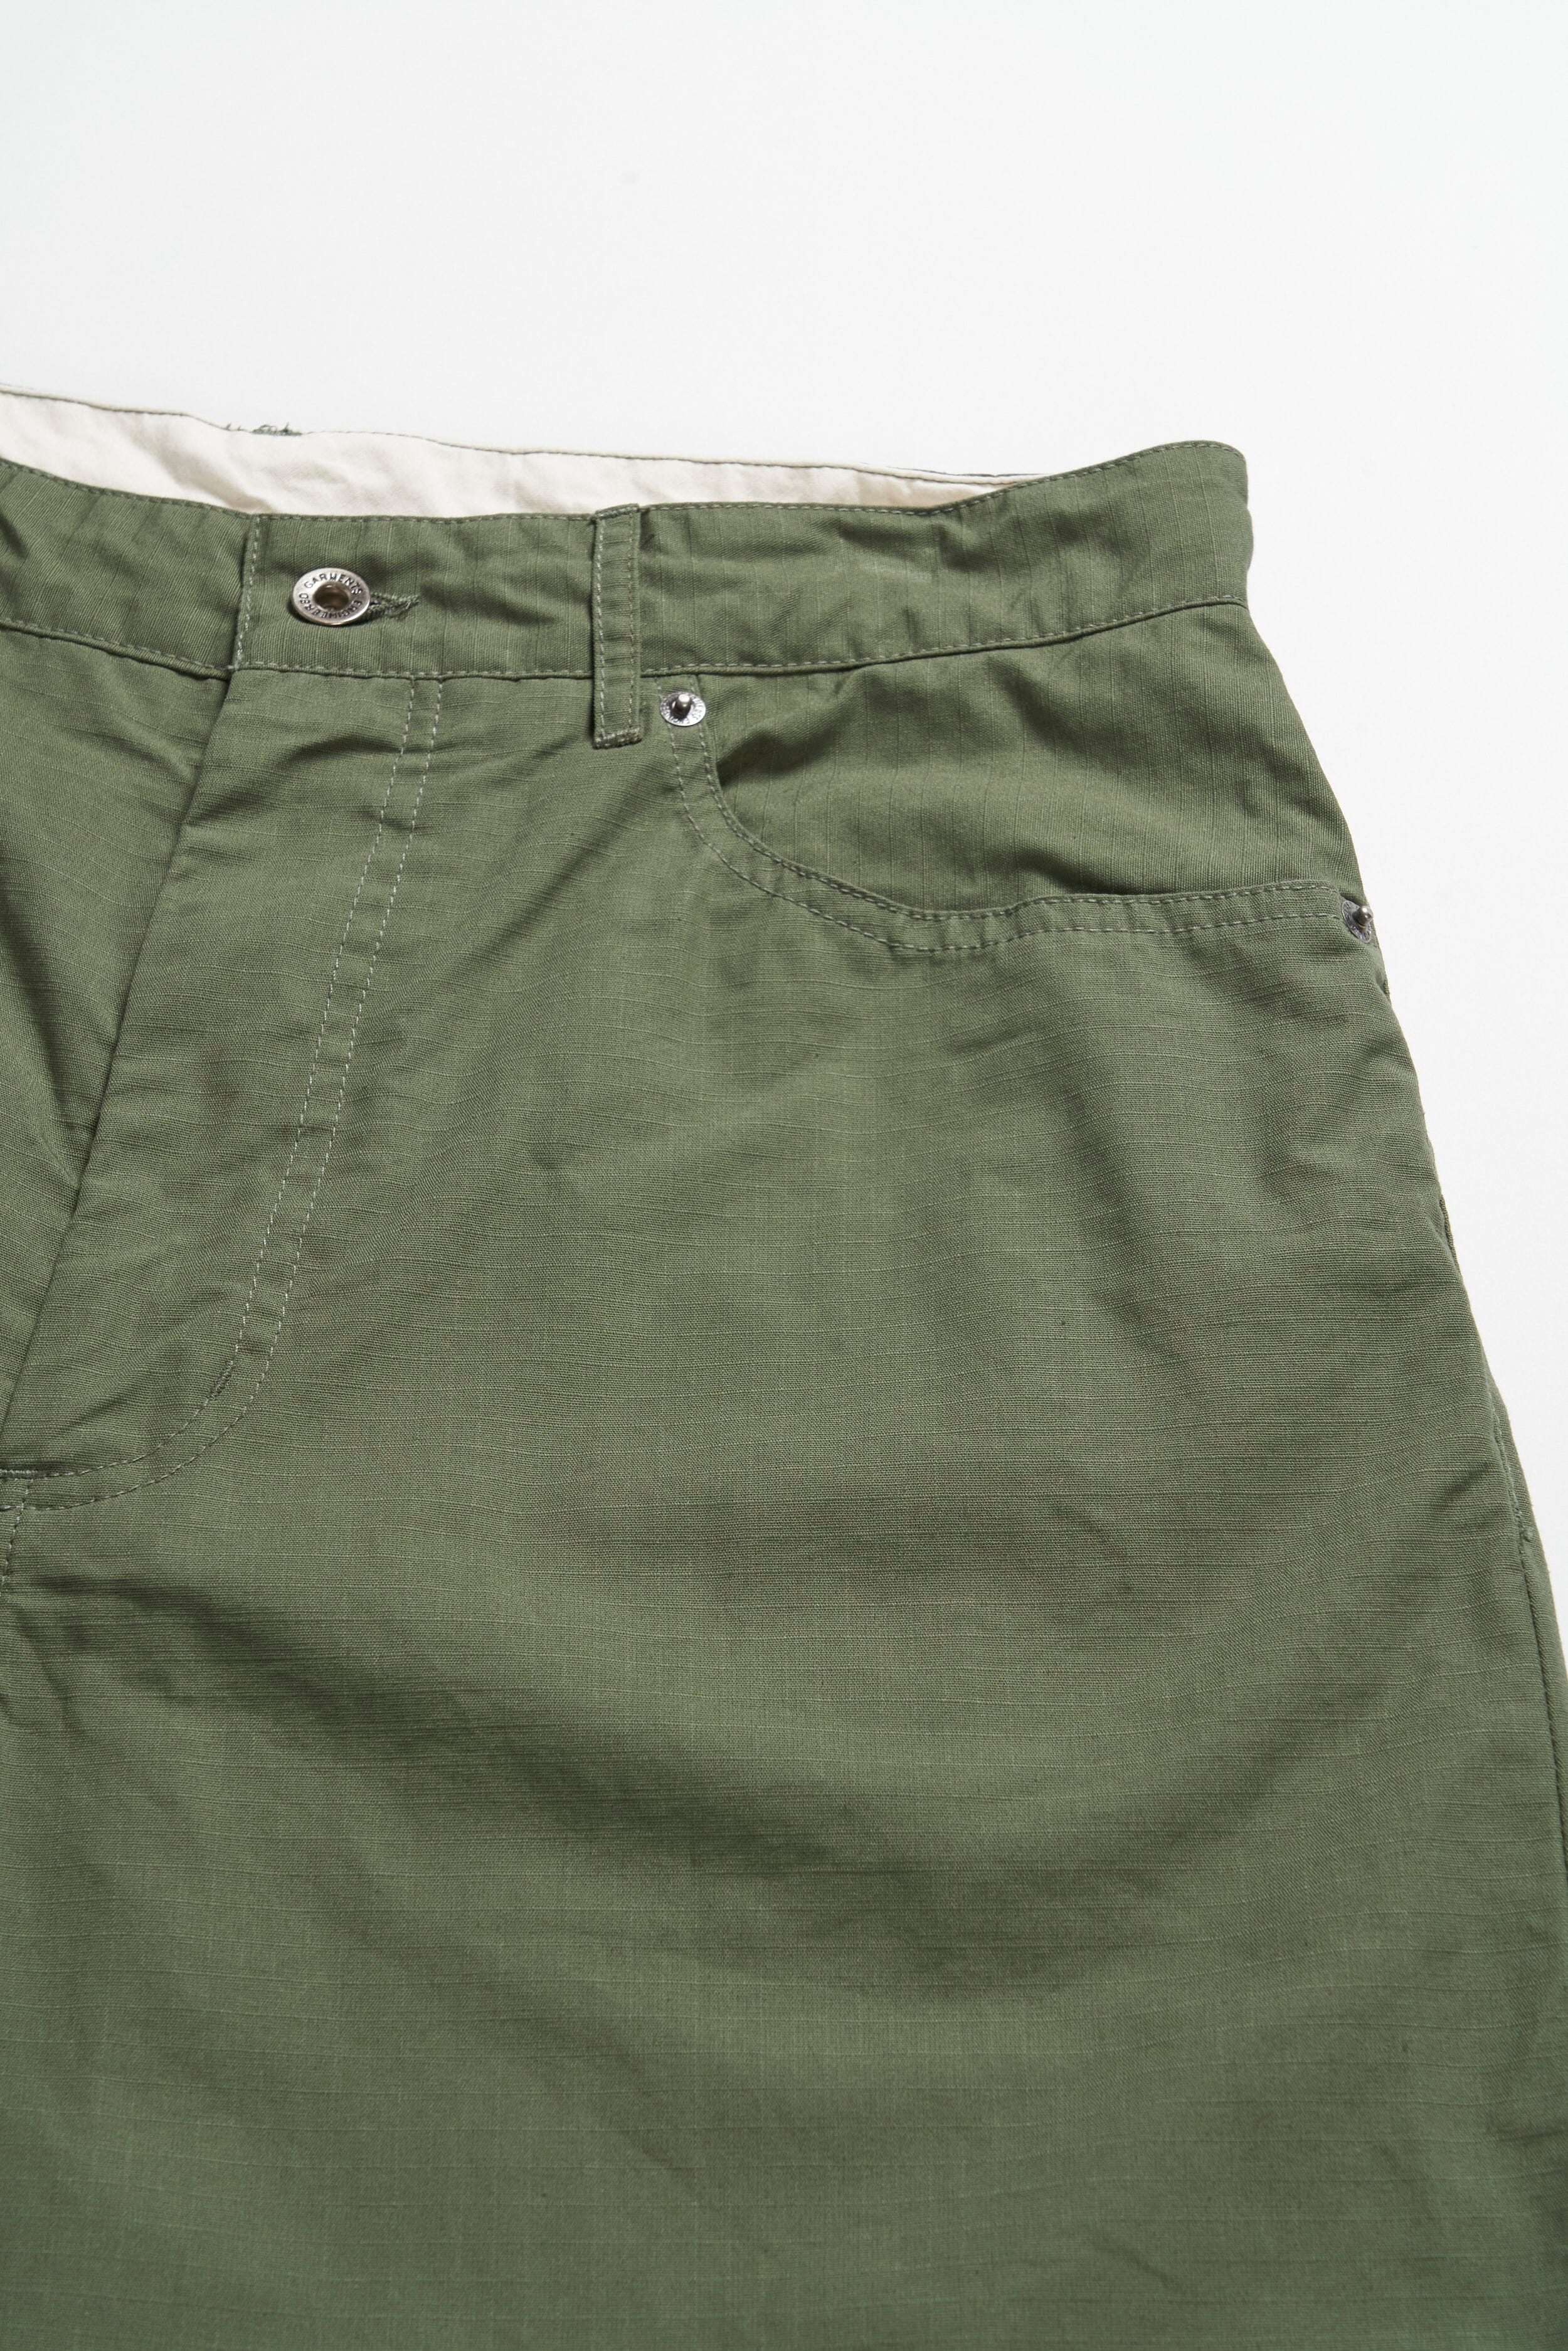 Engineered Garments - RF Jeans - Olive Cotton Ripstop - City Workshop Men's Supply Co.